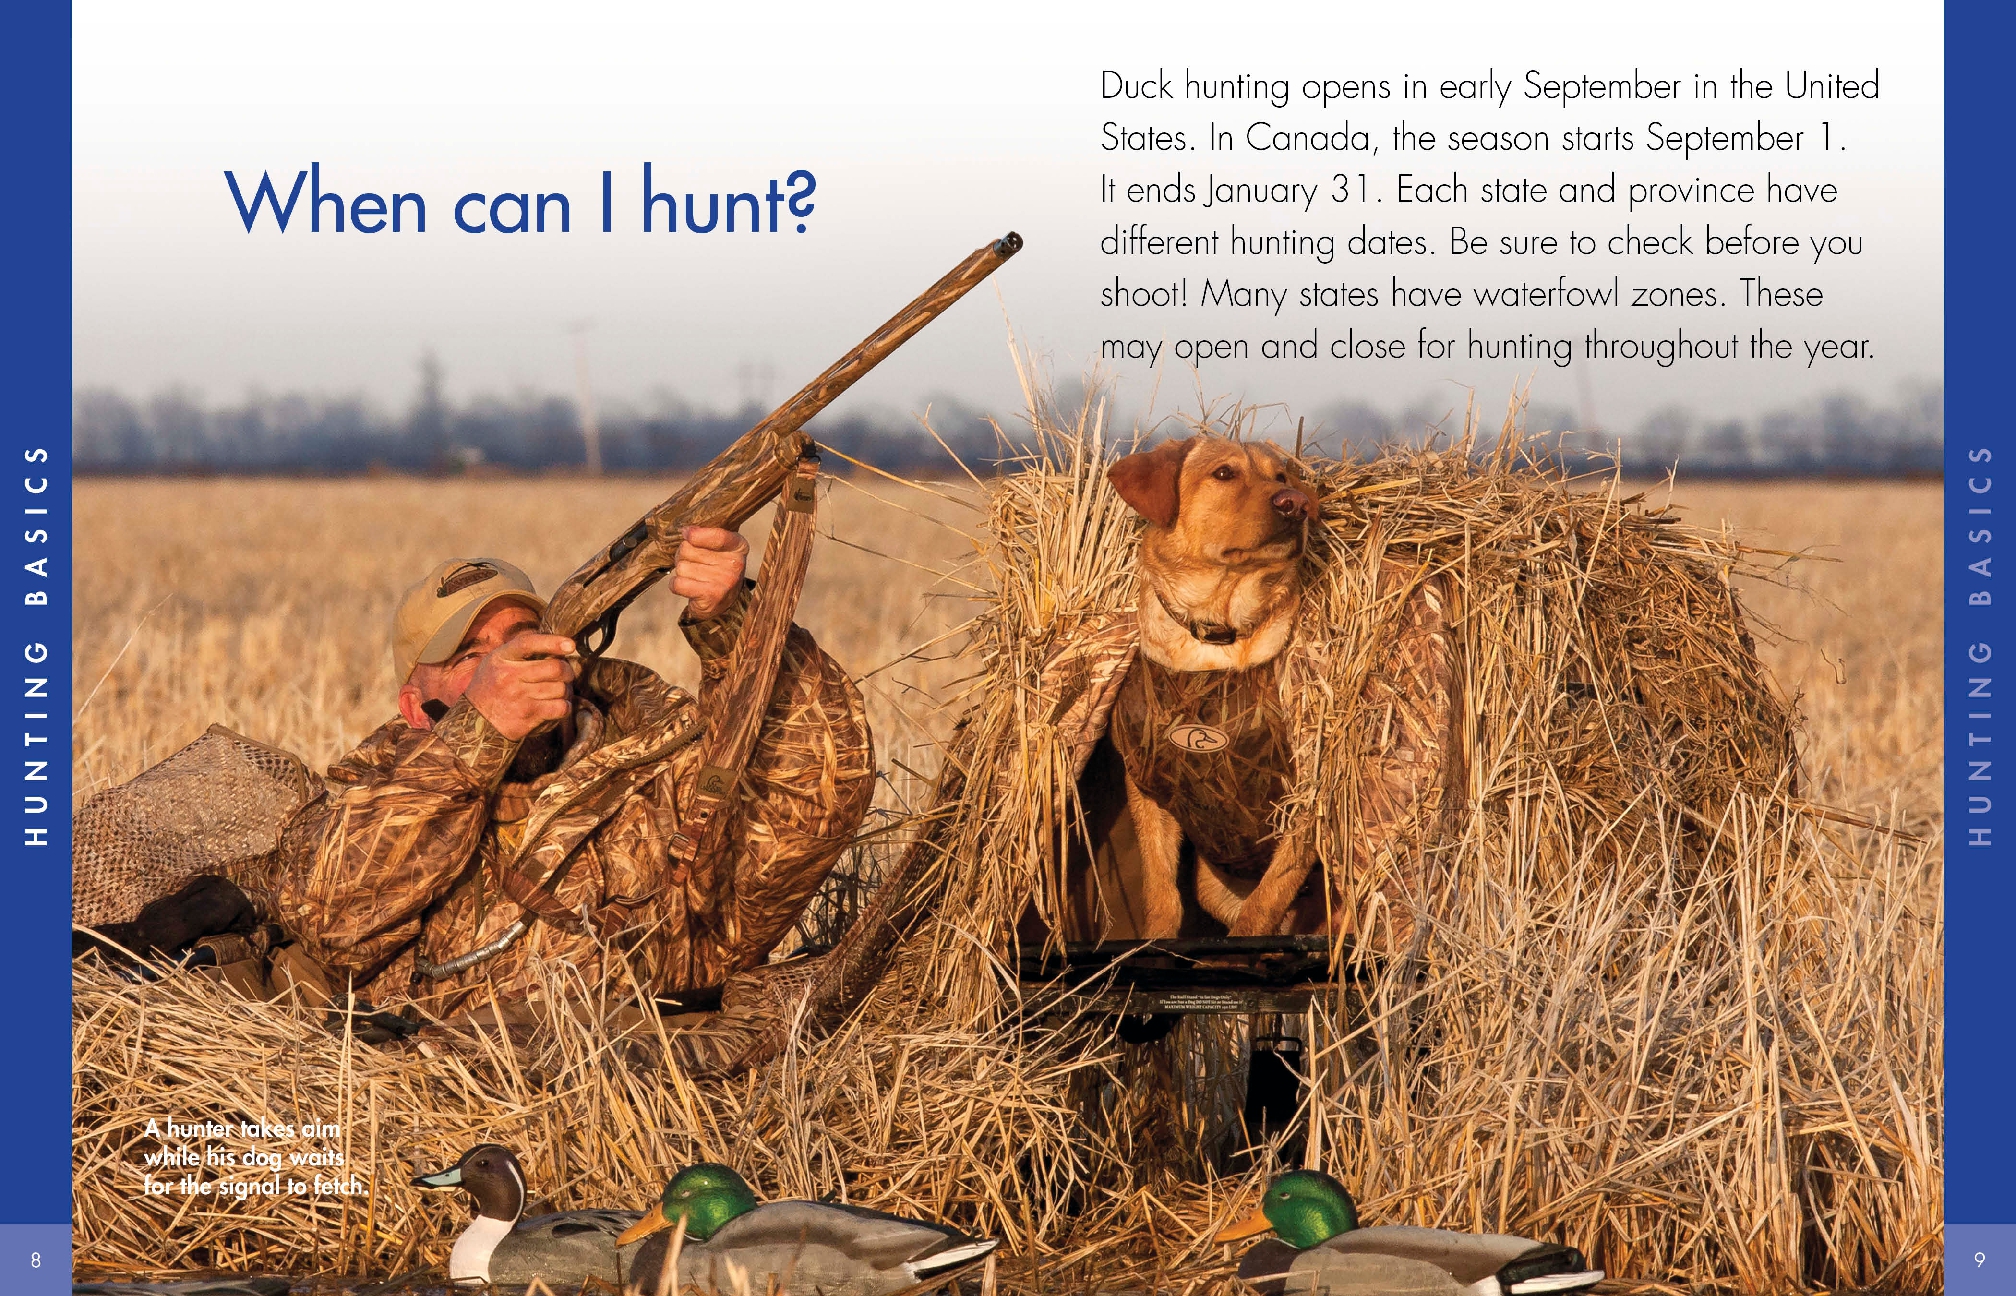 Curious about Duck Hunting